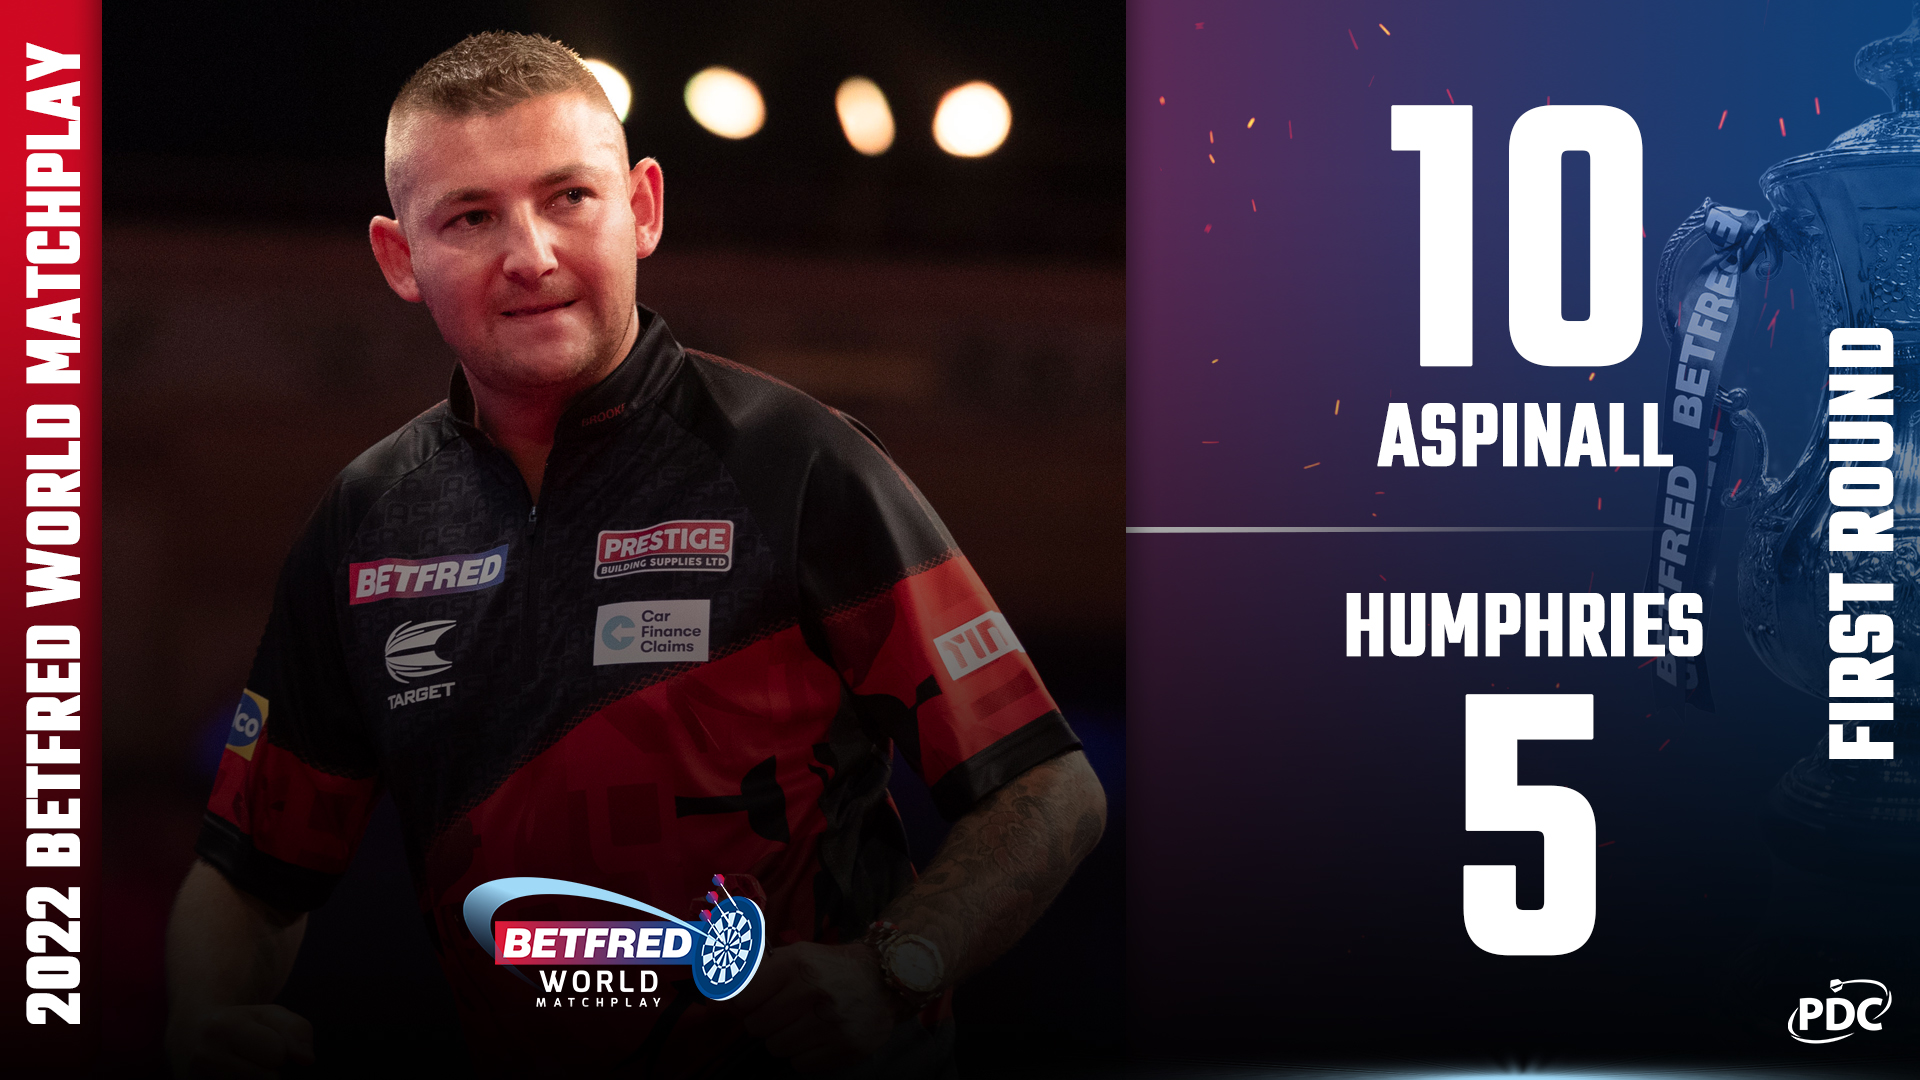 PDC Darts on Twitter: "ASPINALL HAMMERS HUMPHRIES! dominant display from Nathan Aspinall sees him dump out one of the tournament favourites Luke Humphries. #WMDarts | R1 https://t.co/eJJXK4DqqY https://t.co/XsxWtTeUEm" / Twitter